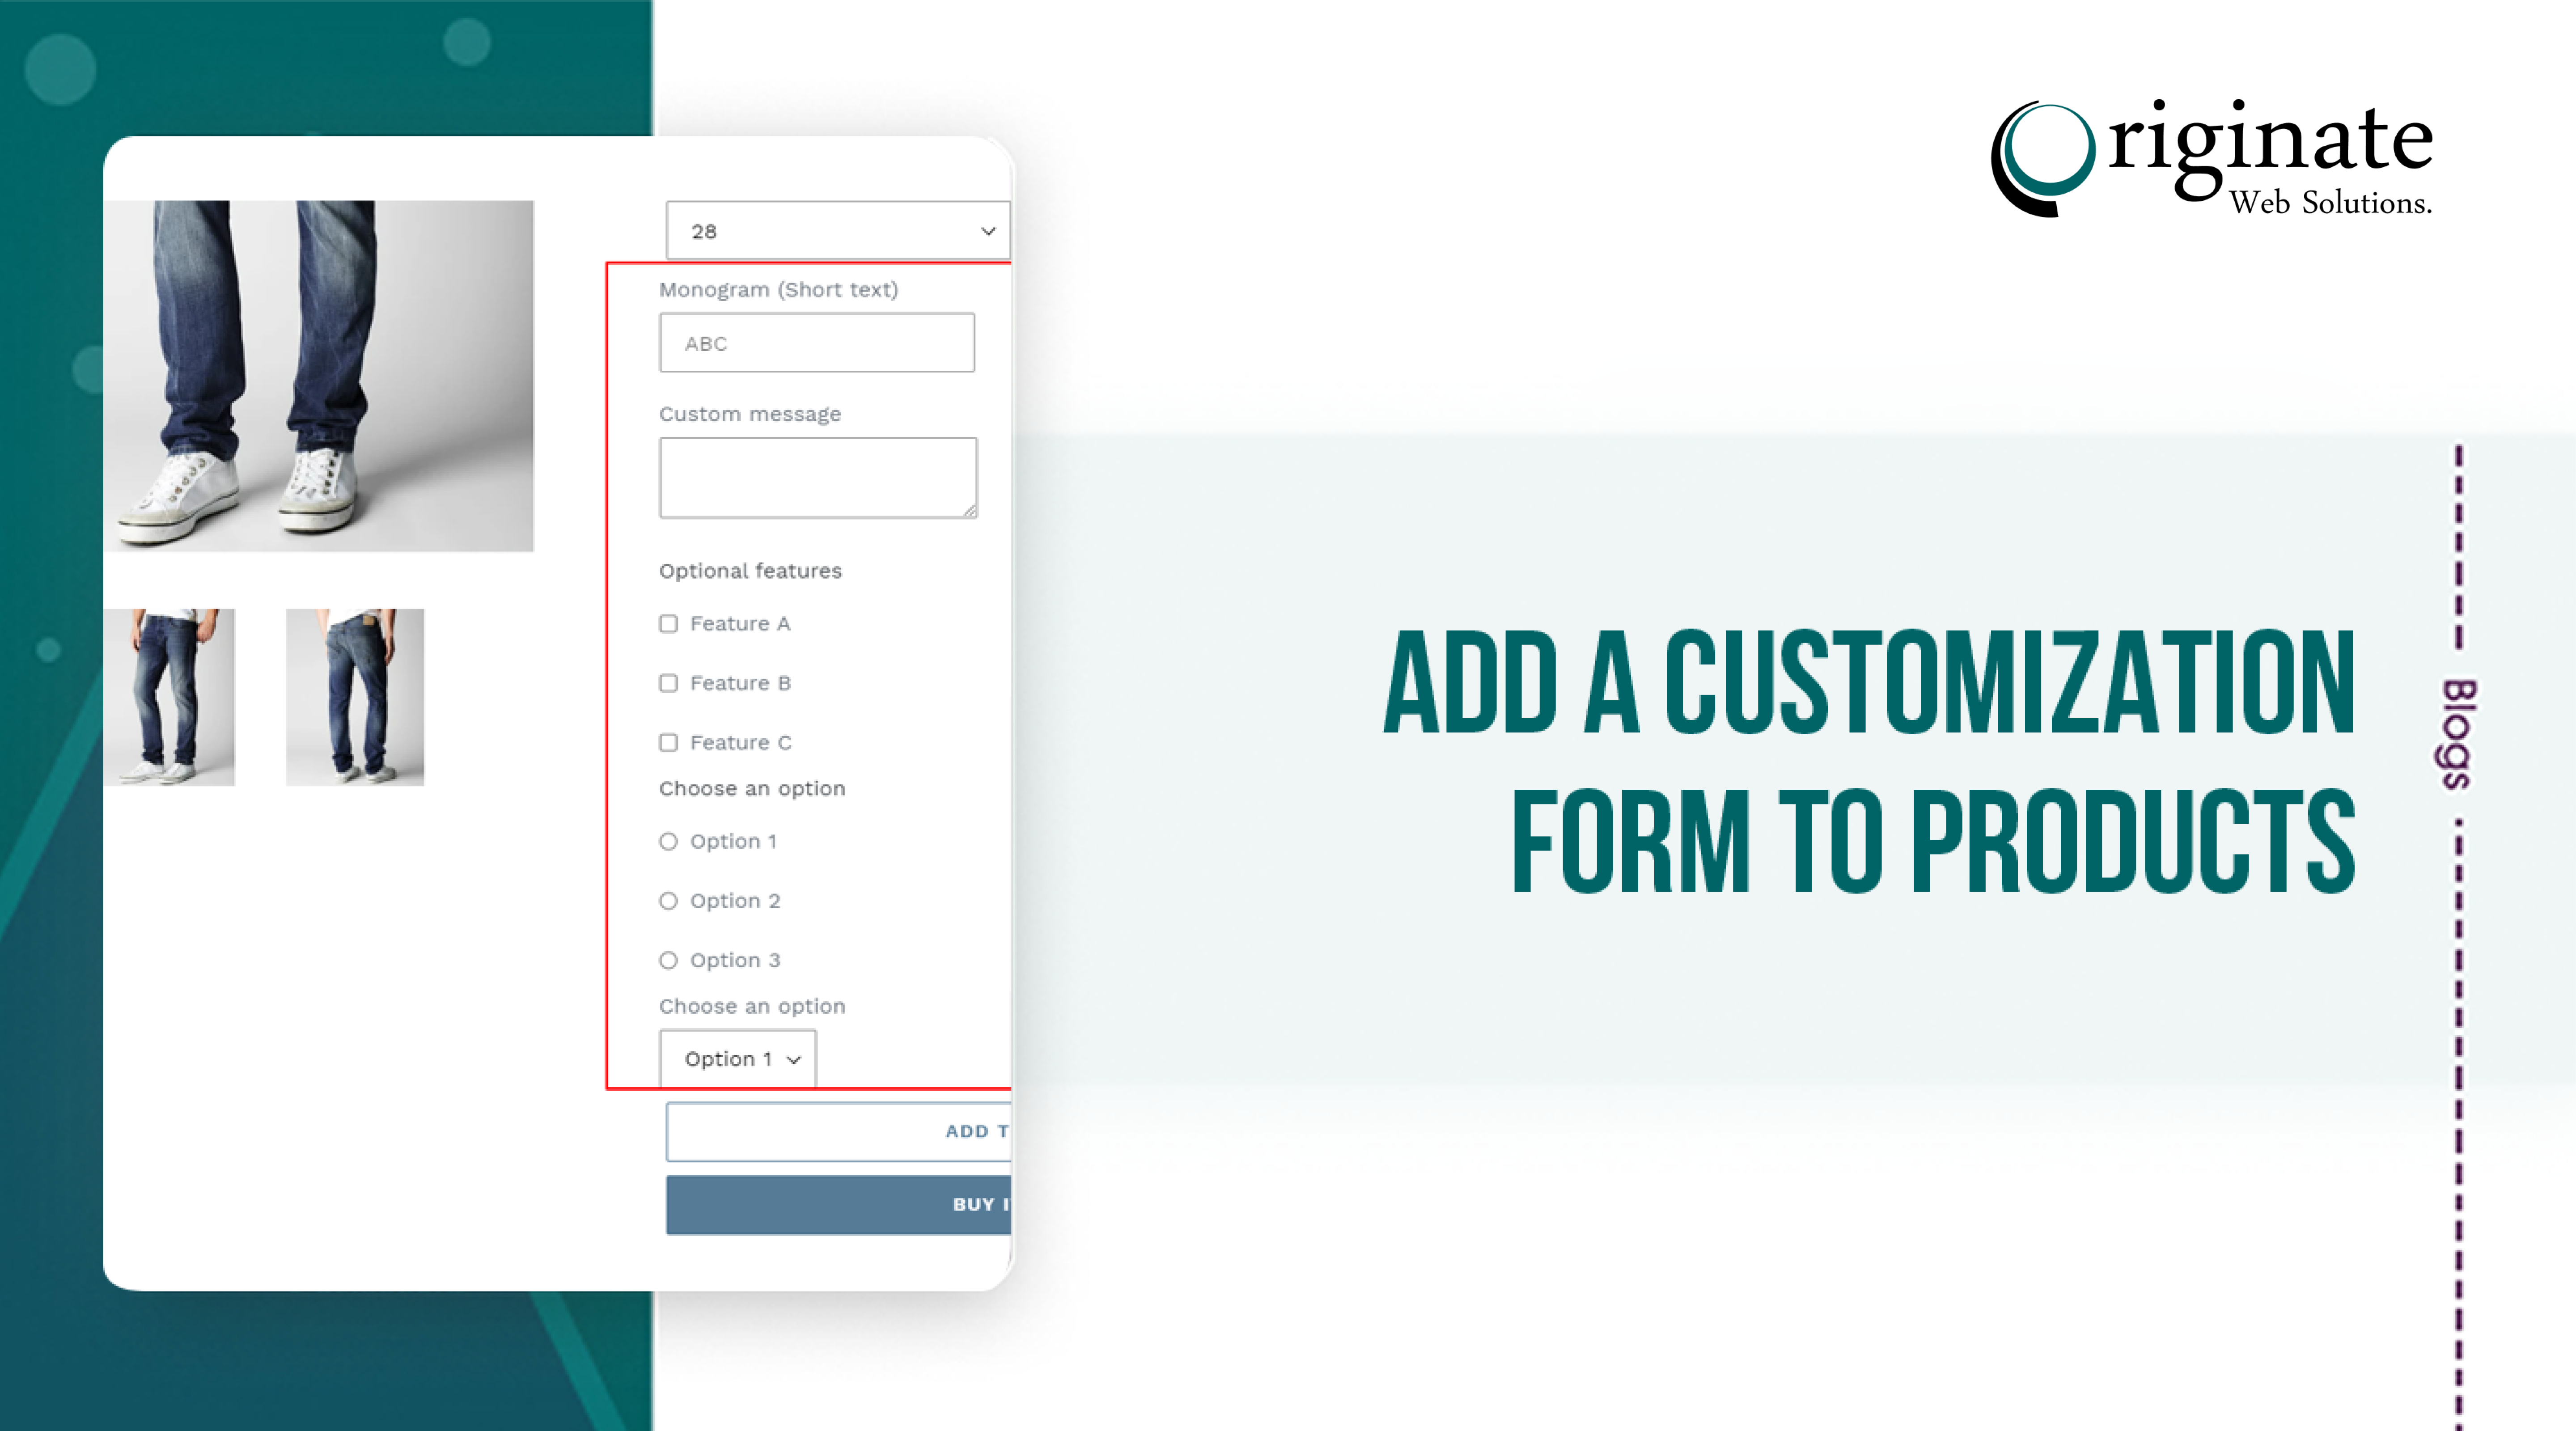 Add a customization form to products